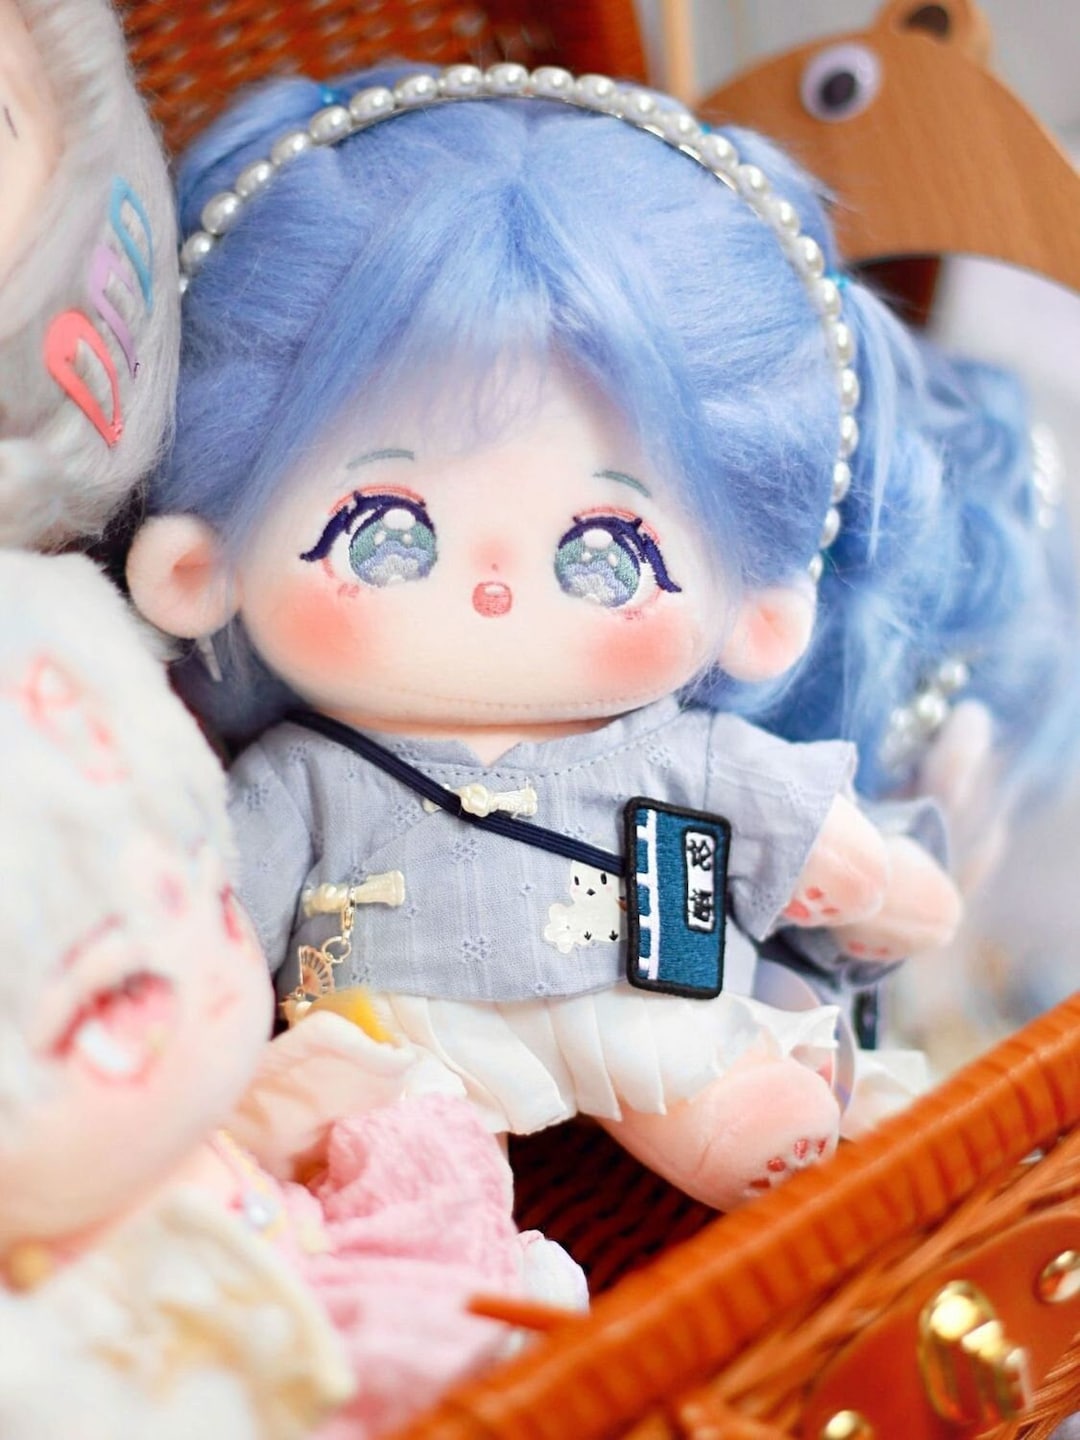 20cm Cotton Doll Anime Game Plush Toy for Dress-up Cute Anime Figure  Design, for Kids and Adults, Soft and Cuddly, Ideal Holiday Ornament